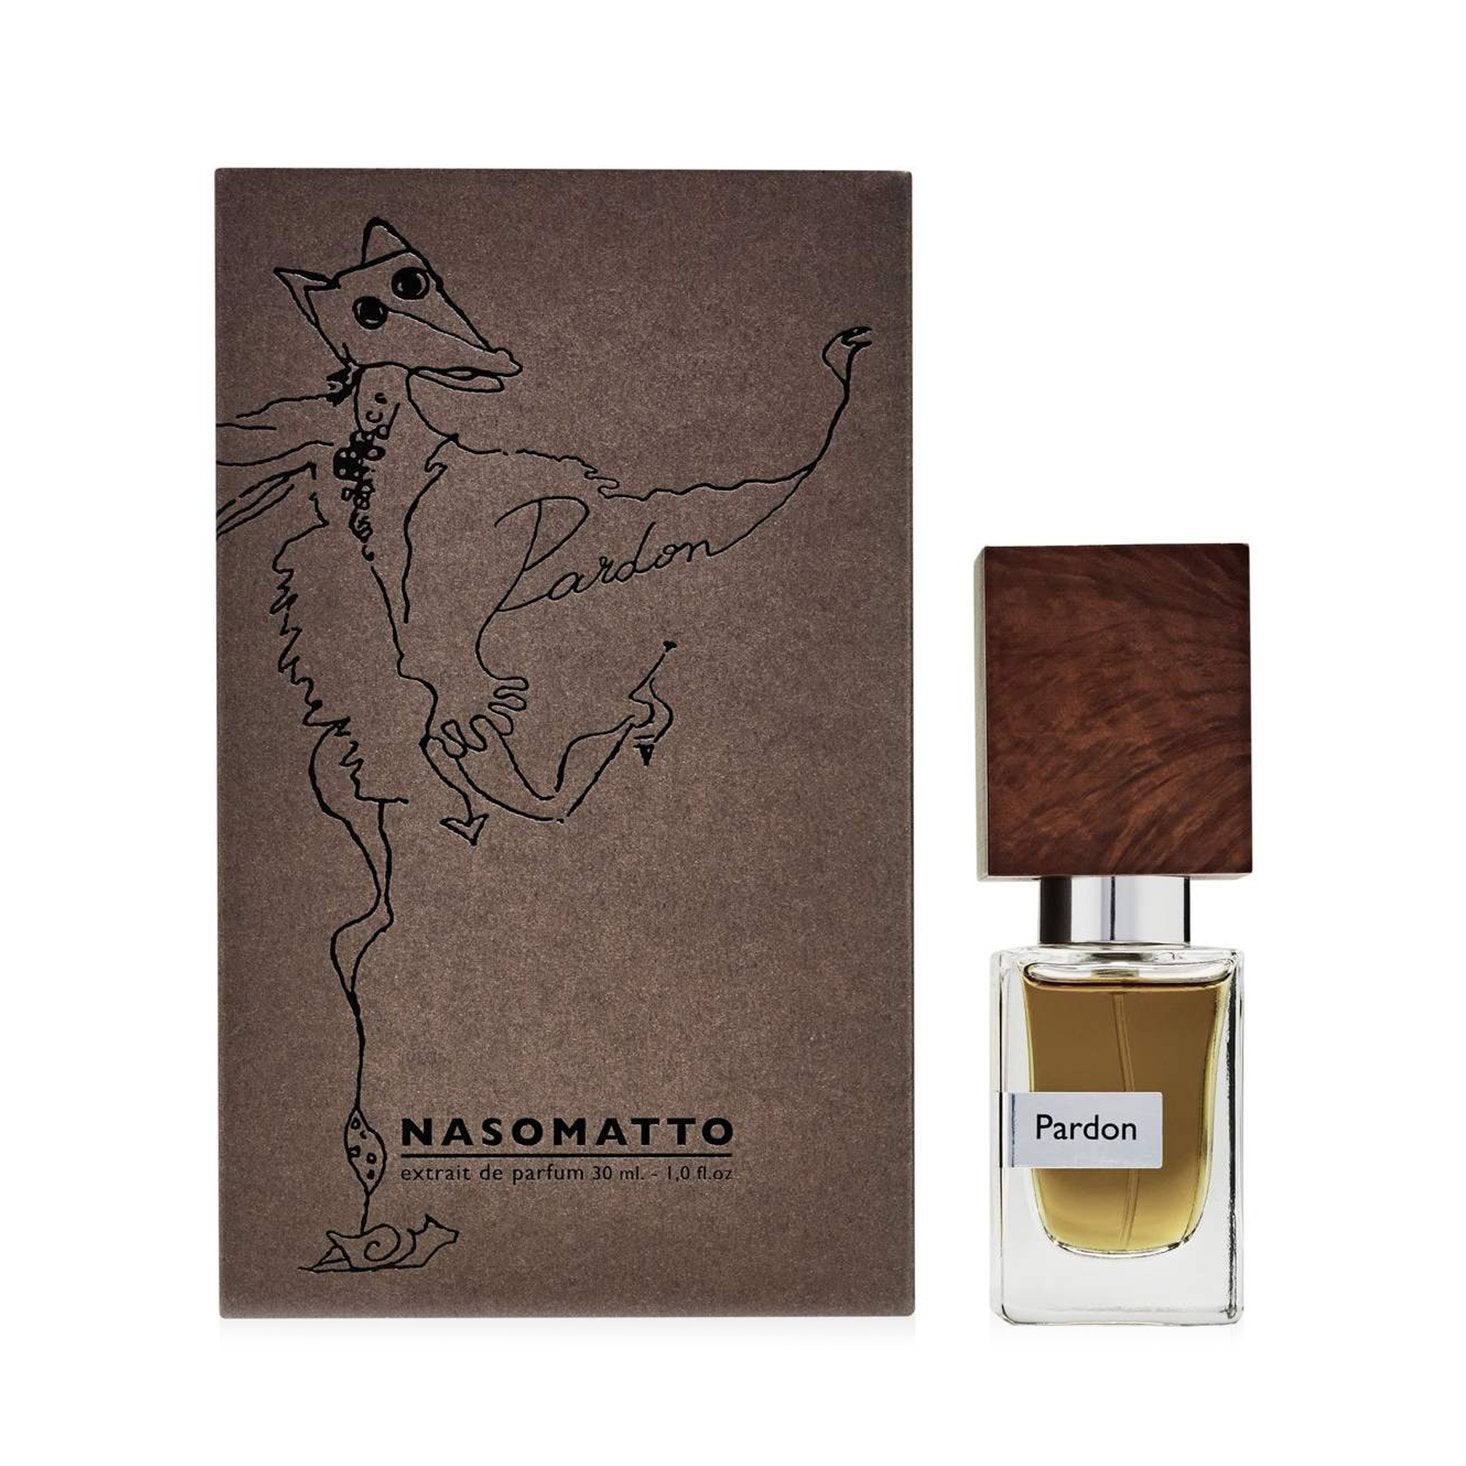 BEON.COM.AU Elegant and charming, Nasomatto's Pardon offers a soft, smooth fragrance experience for the skin. Pardon is inspired by the sophisticated and suave gentlemen of the late 18th and early 19th century. It opens with a faintly sweet floral whisper which then moves to hints of dark unsweetened cho... Nasomatto at BEON.COM.AU